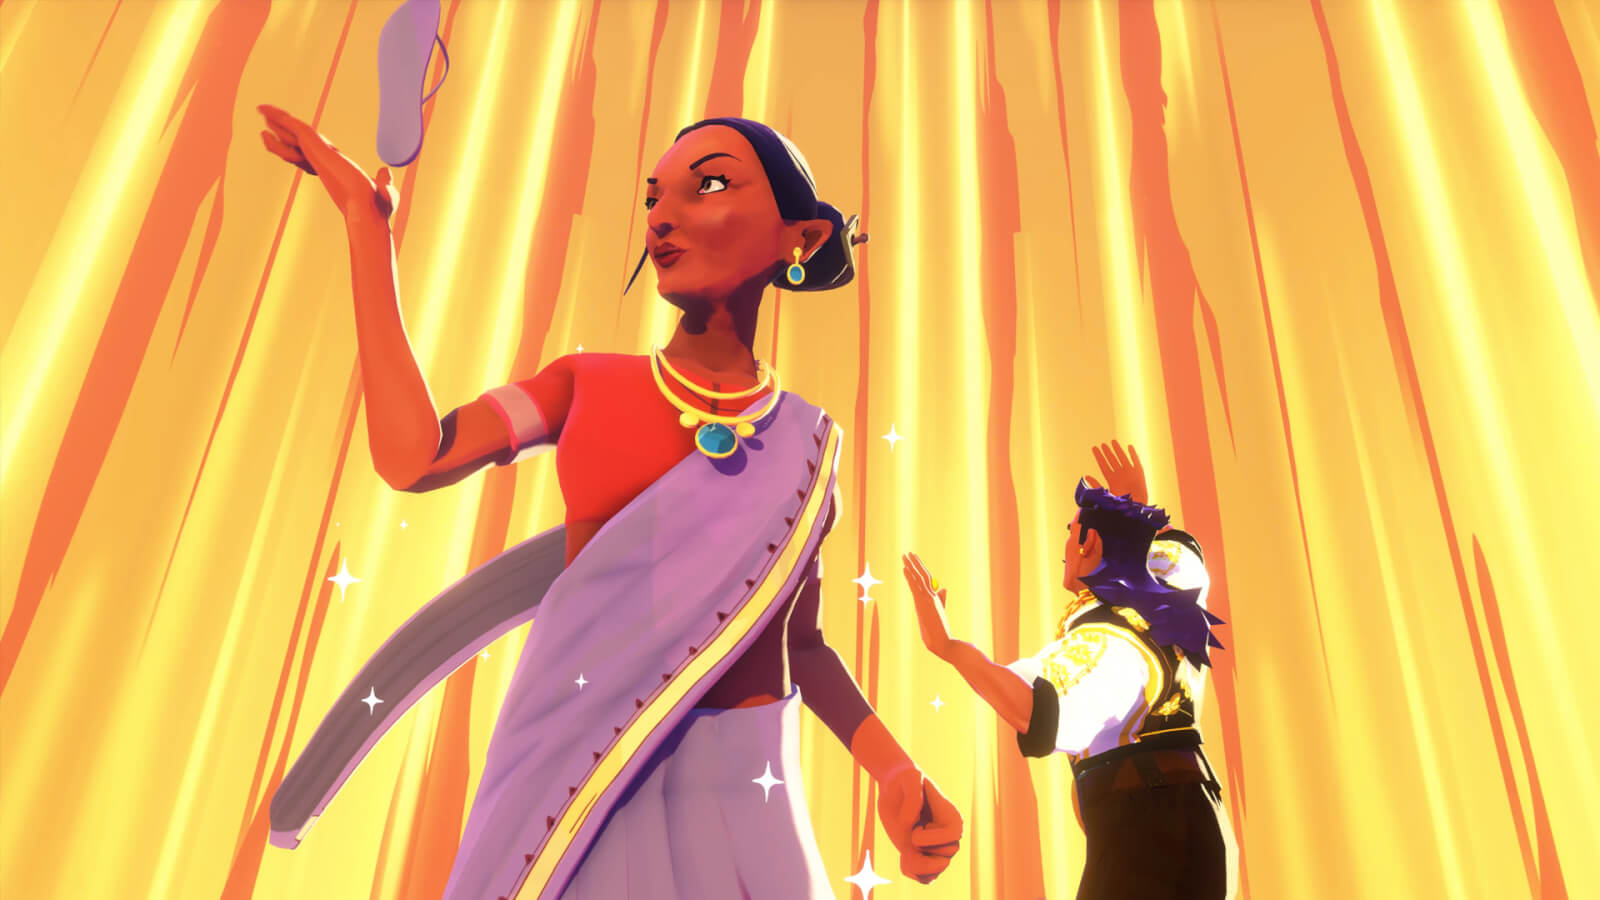 Creators Of "Thirsty Suitors" Are Fixing The Lack Of South Asian Avatars In The Gaming World: "Thirsty Suitors" by Outerloop Games. Photo Credit: Outerloop Games